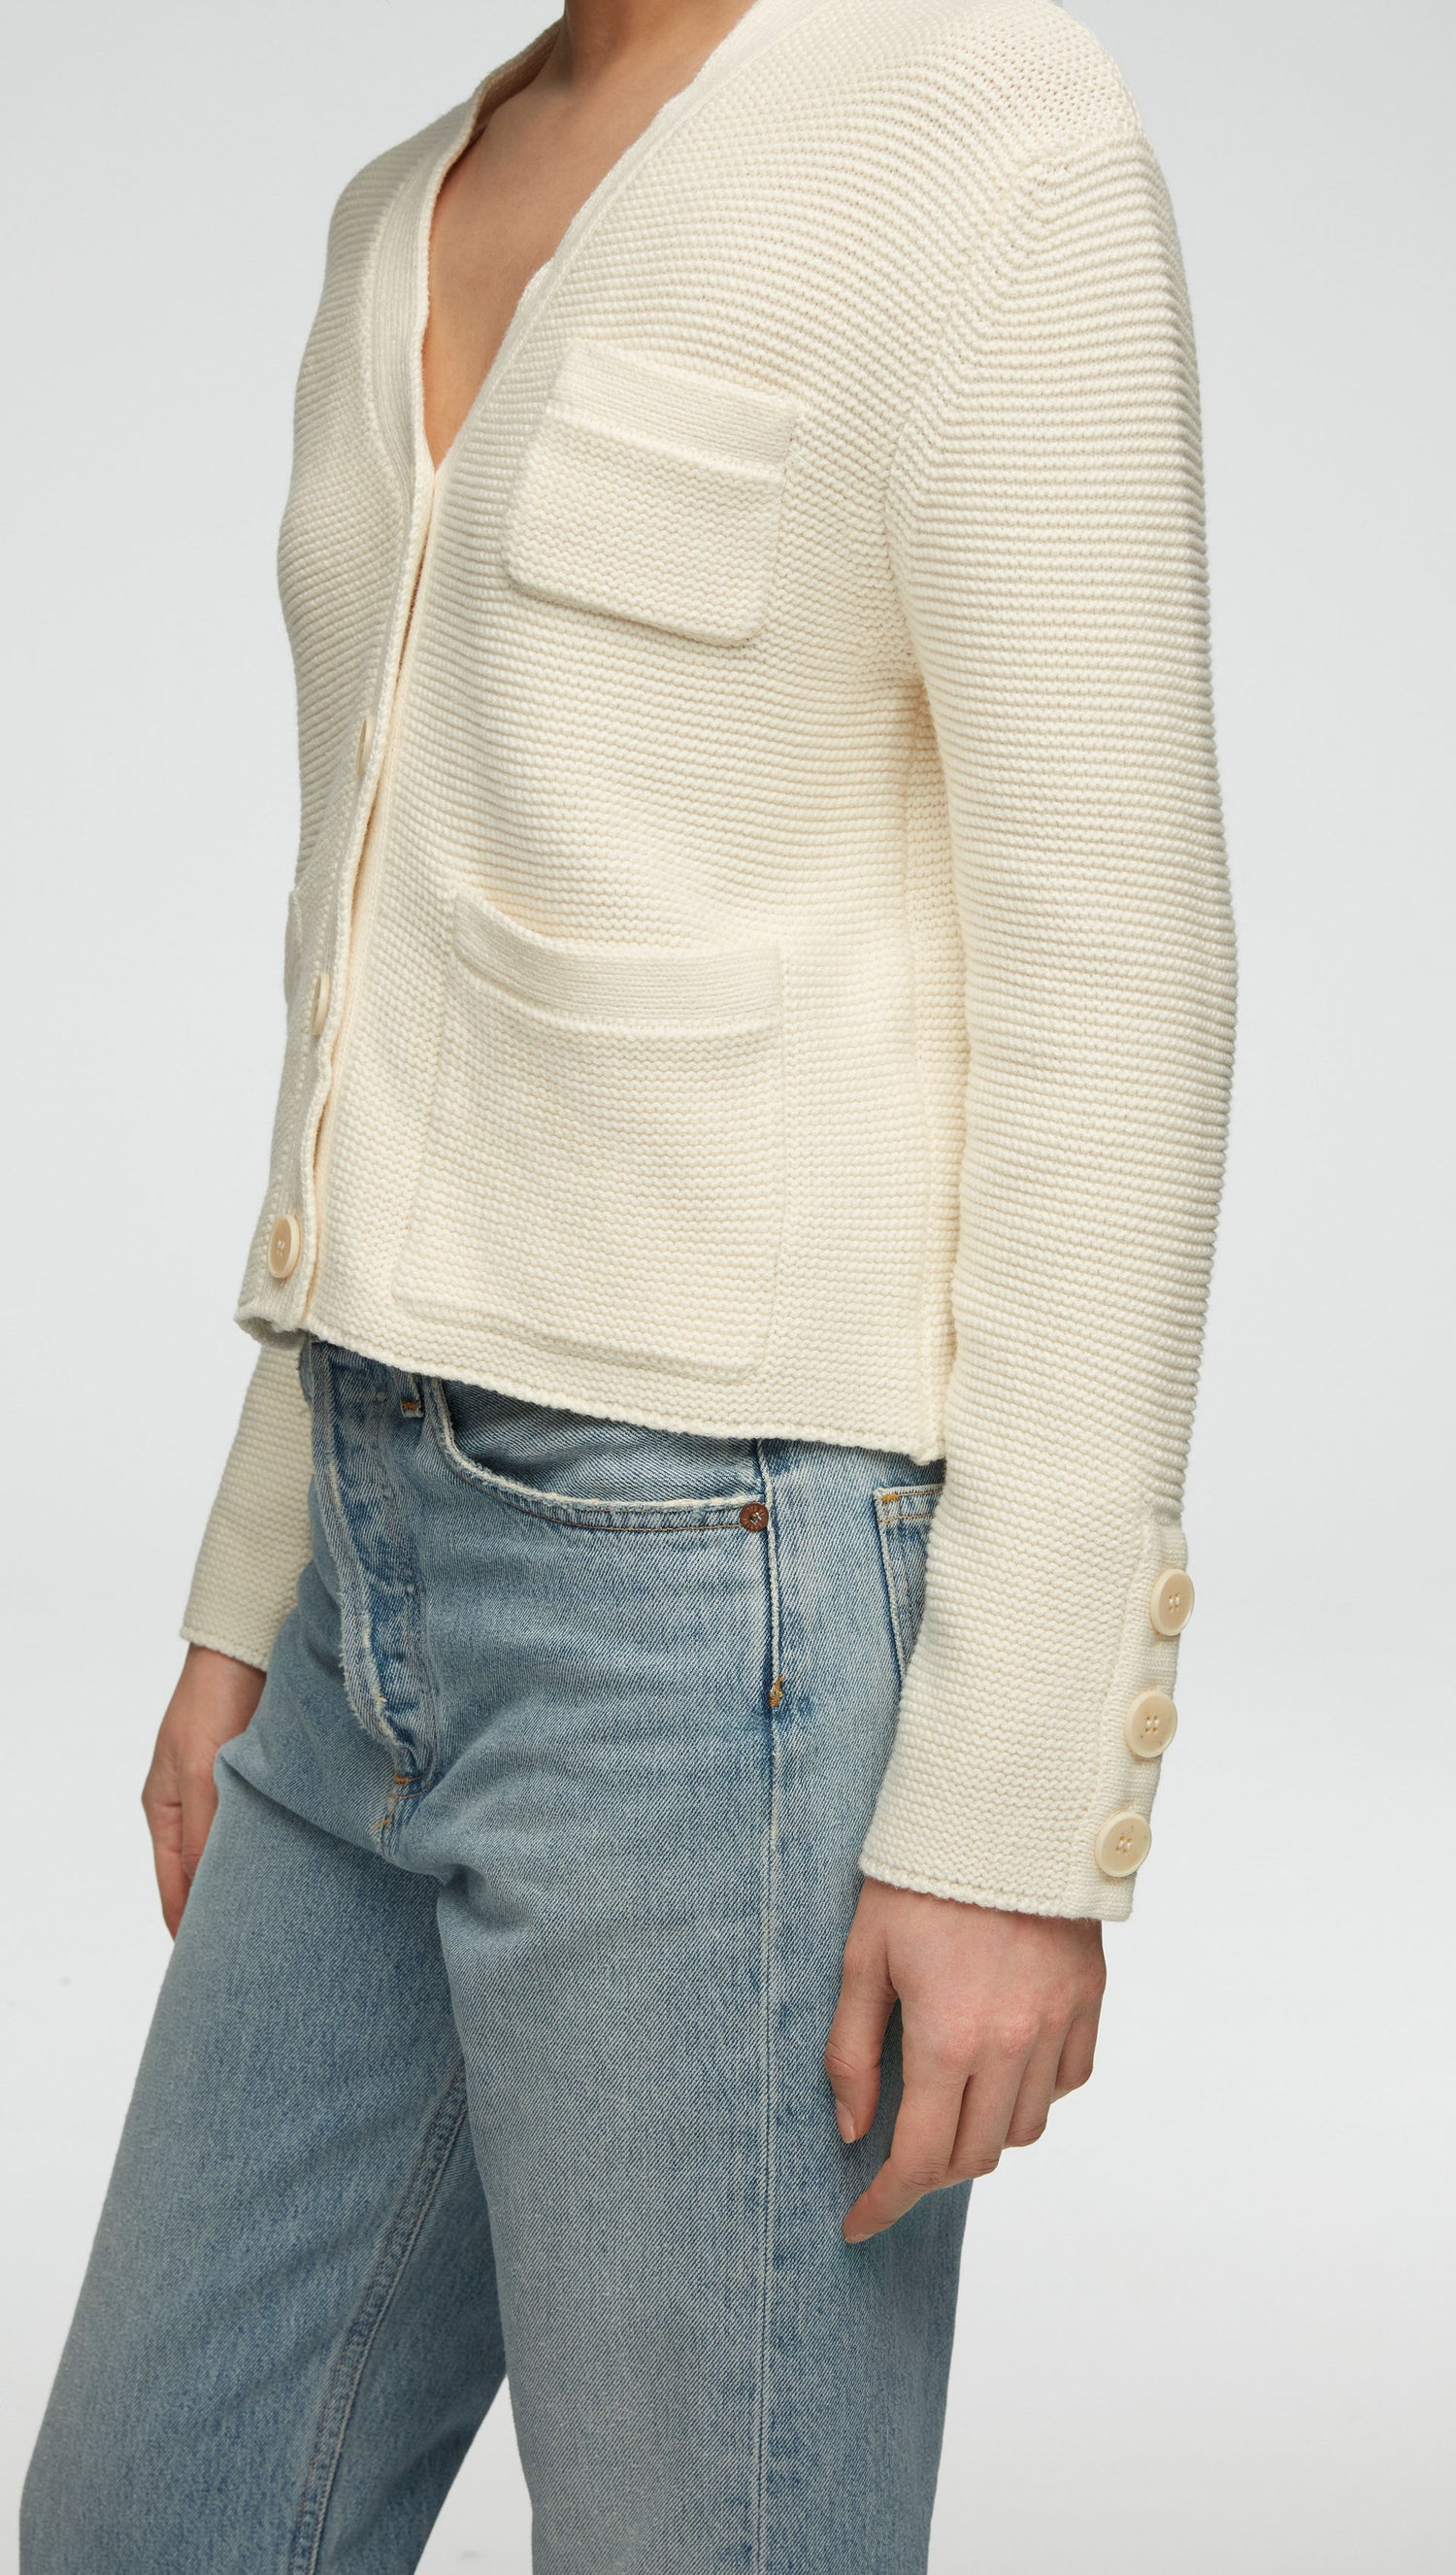 Cropped Cardigan in Cotton Cashmere | Women's Sweaters | Argent